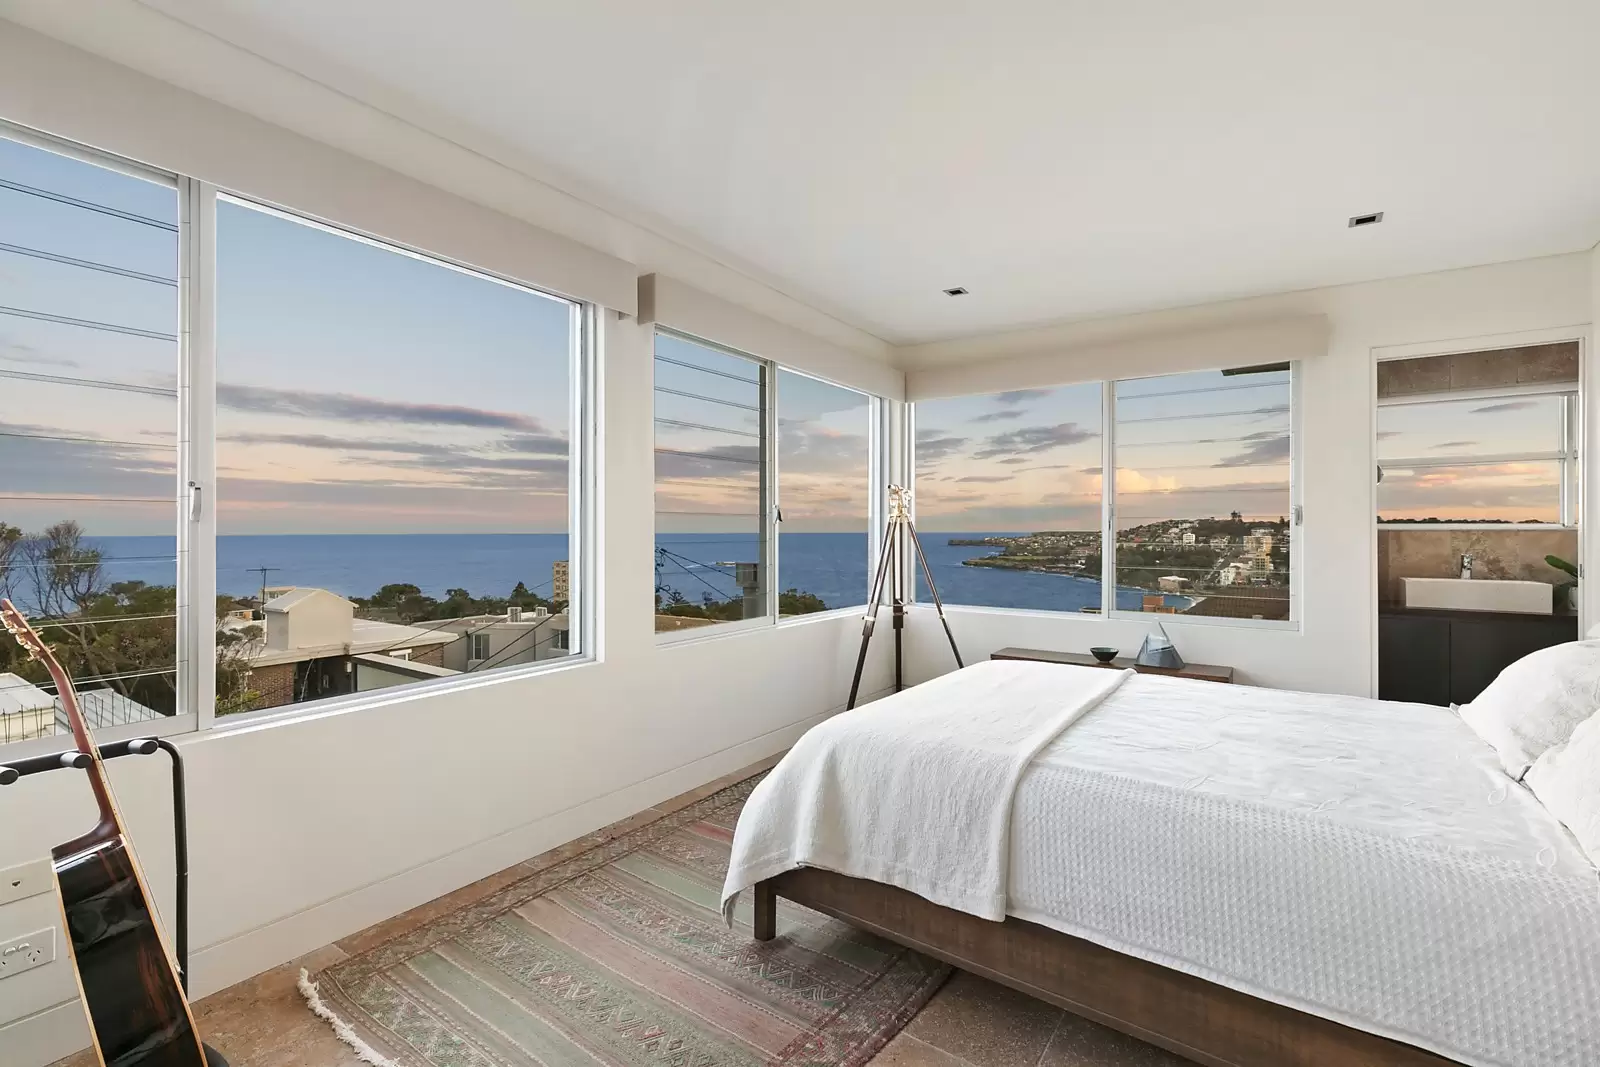 Photo #11: 349 Alison Road, Coogee - Sold by Sydney Sotheby's International Realty